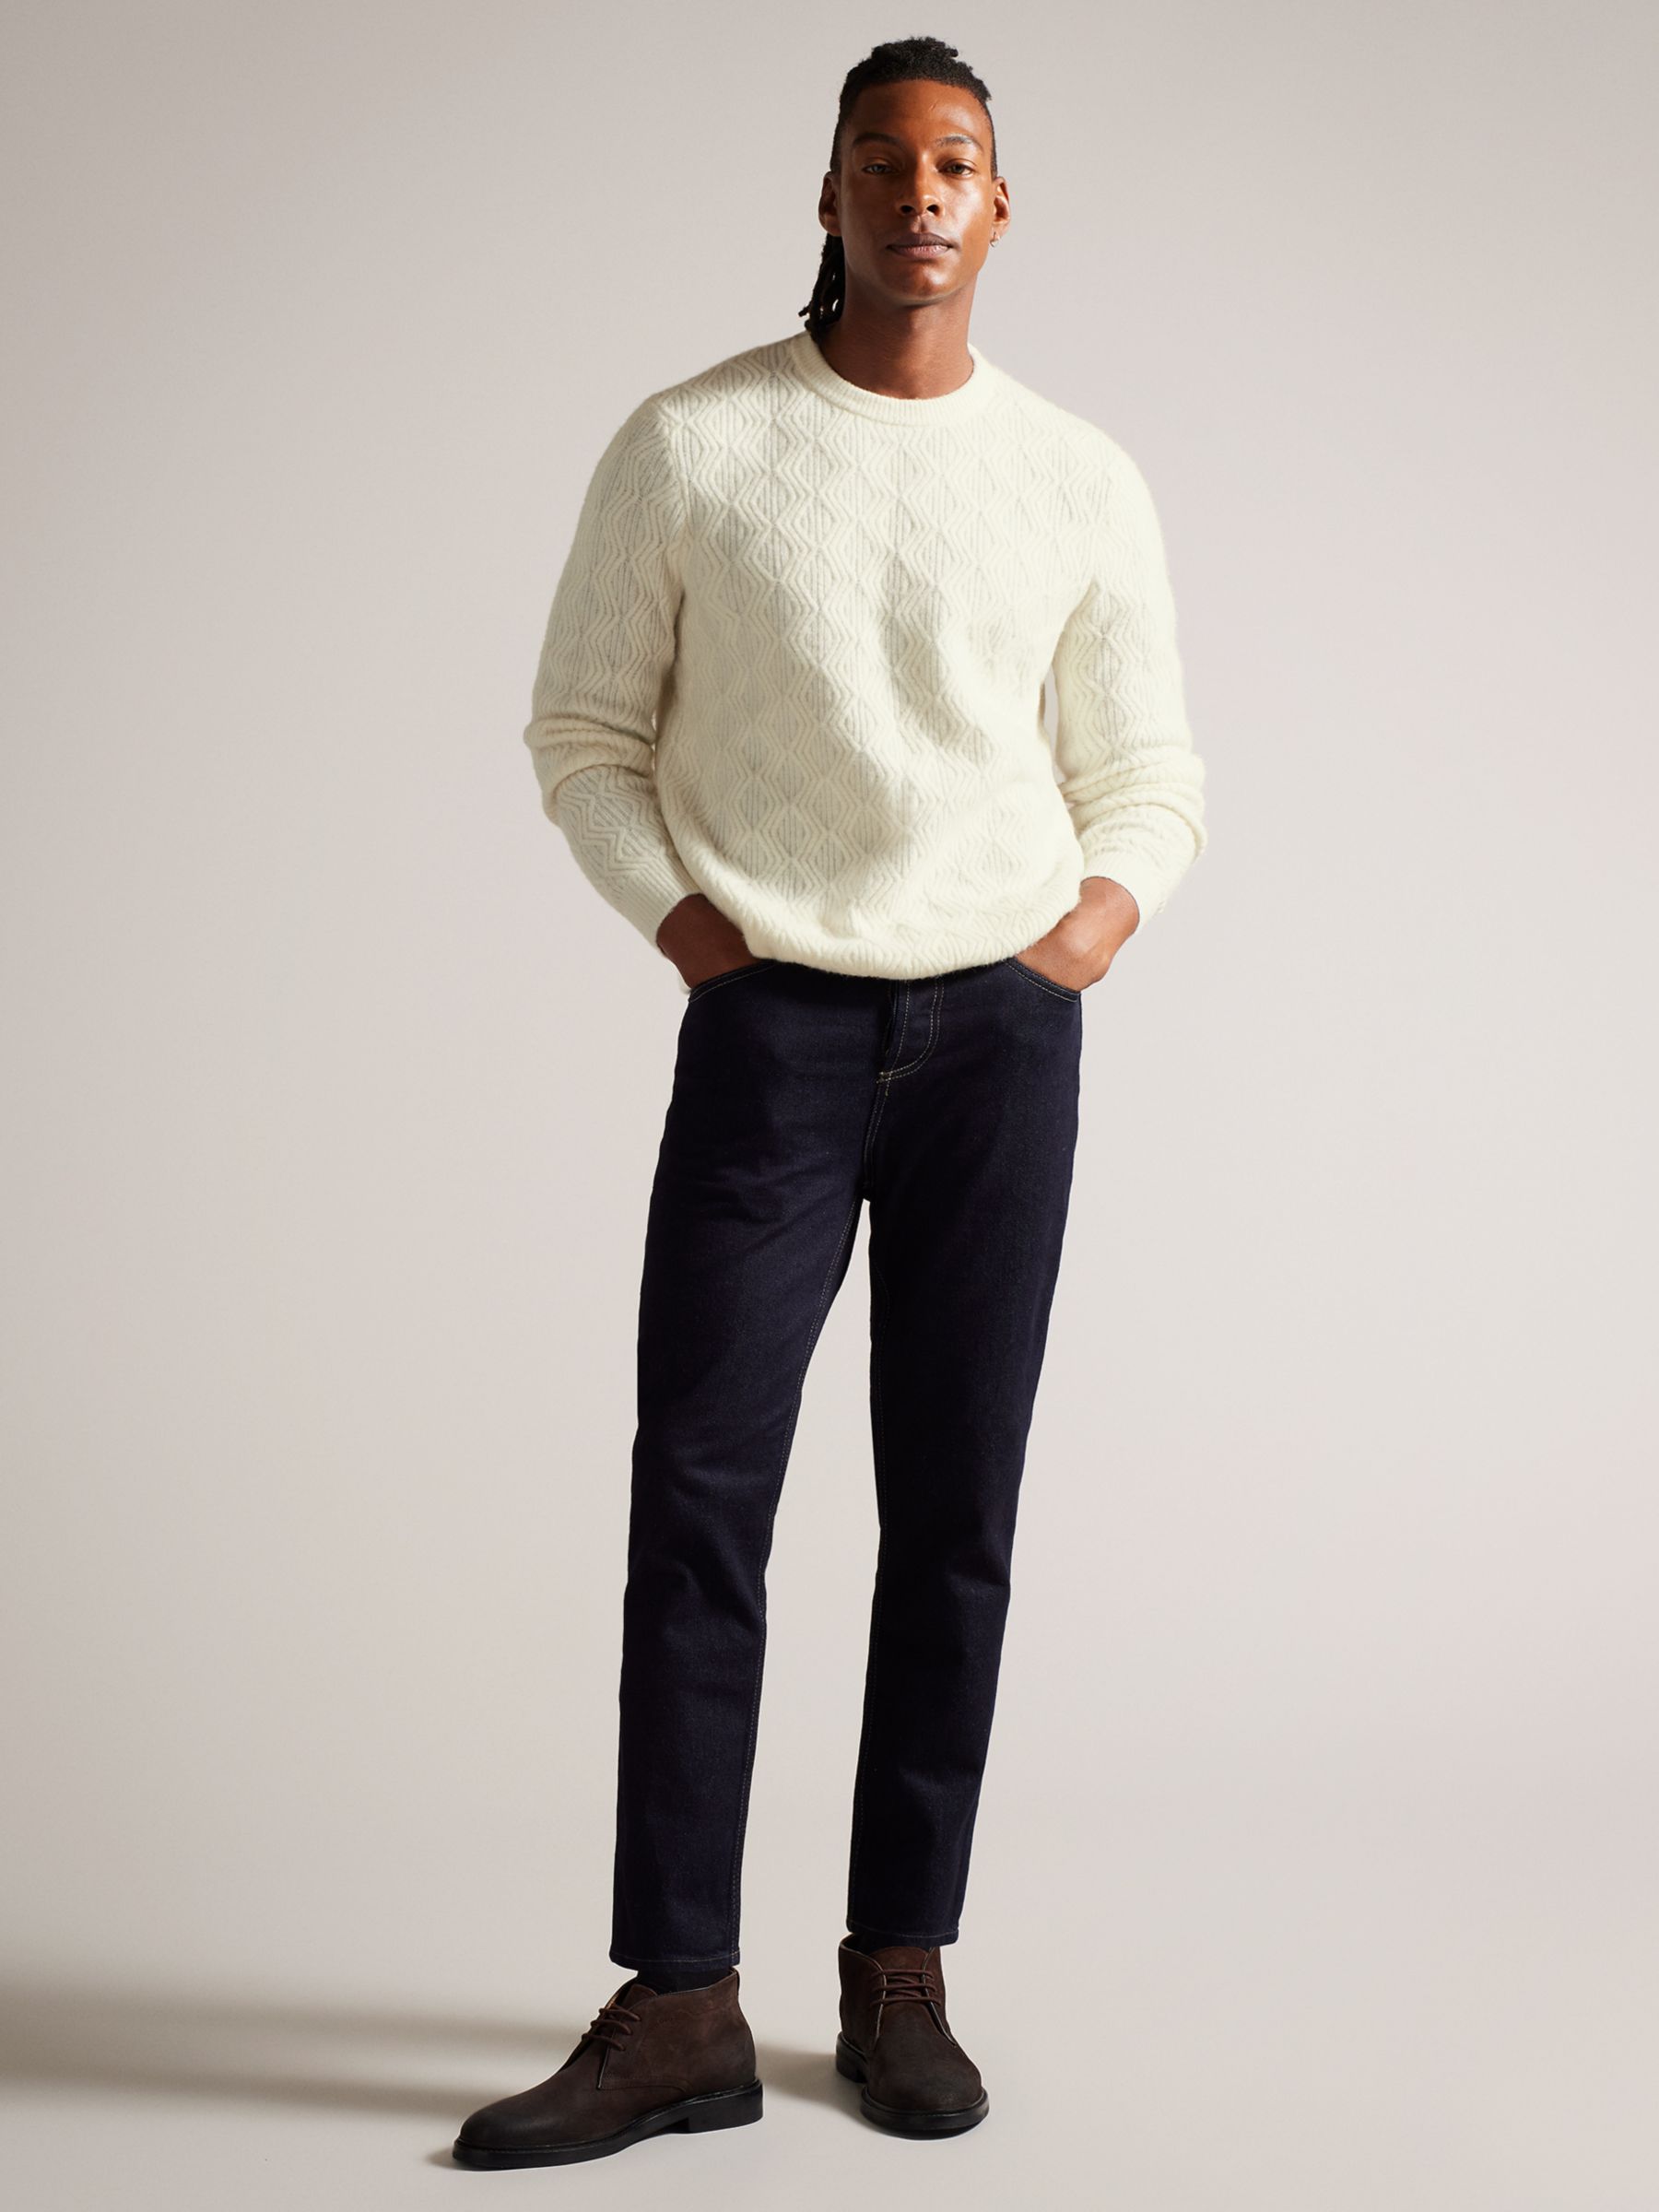 Ted Baker Atchet Long Sleeve Textured Cable Crew Neck Jumper, White, XS